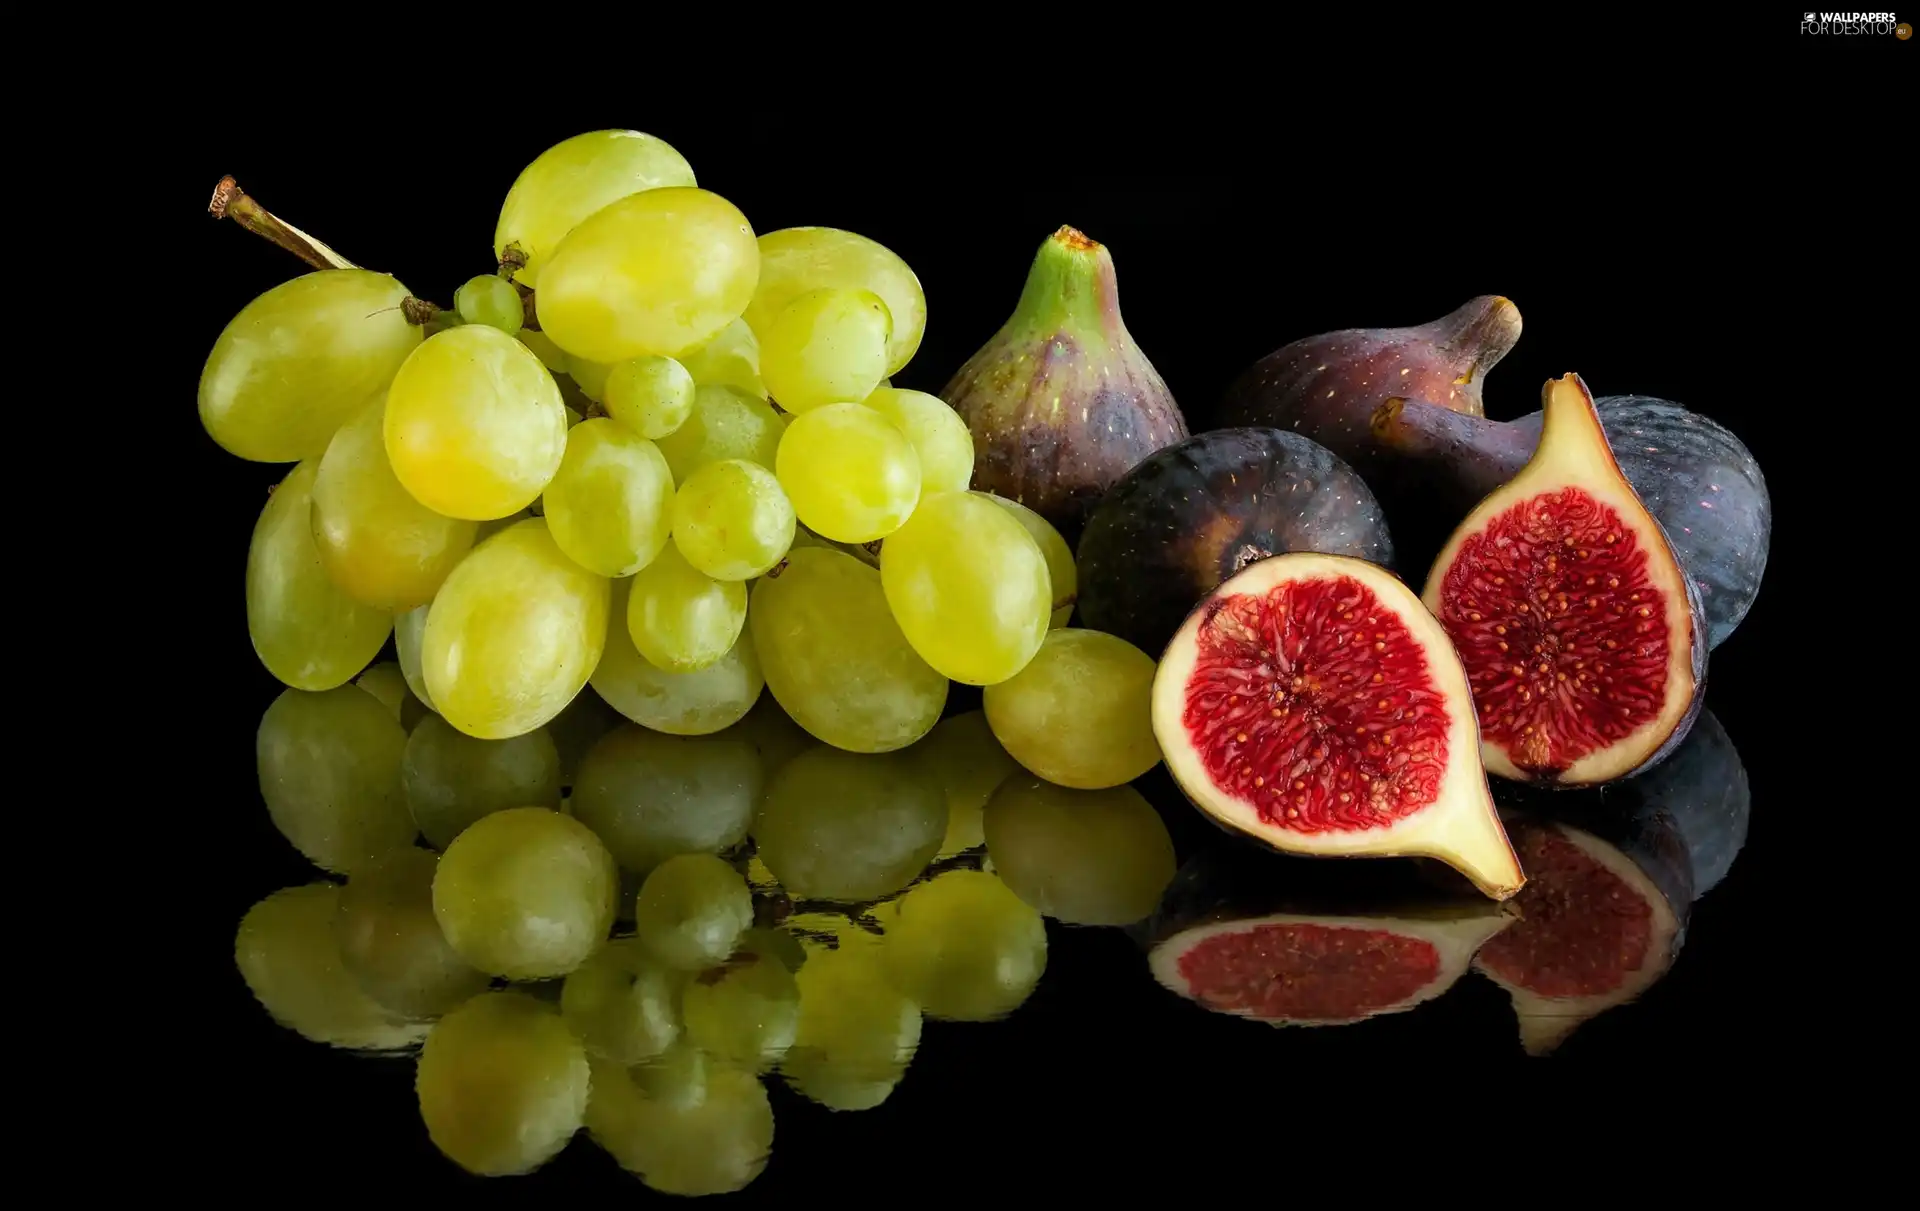 figs, Grapes, reflection, green ones